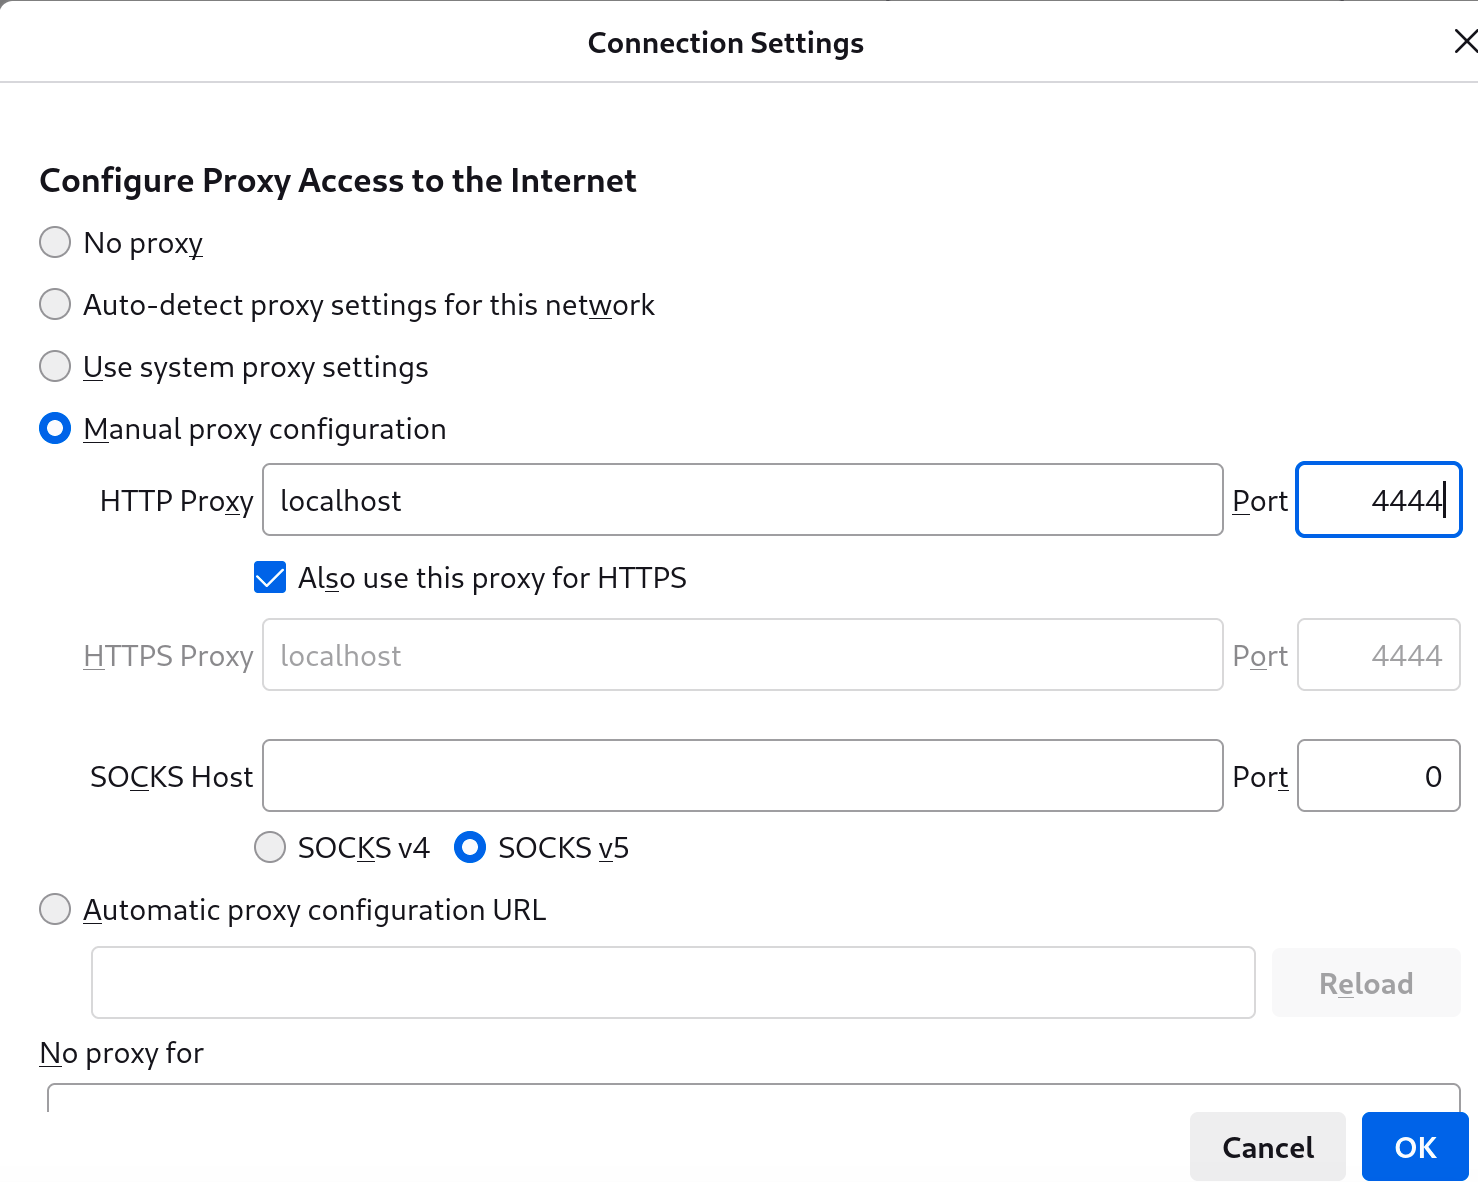 Firefox Connection Settings dialog